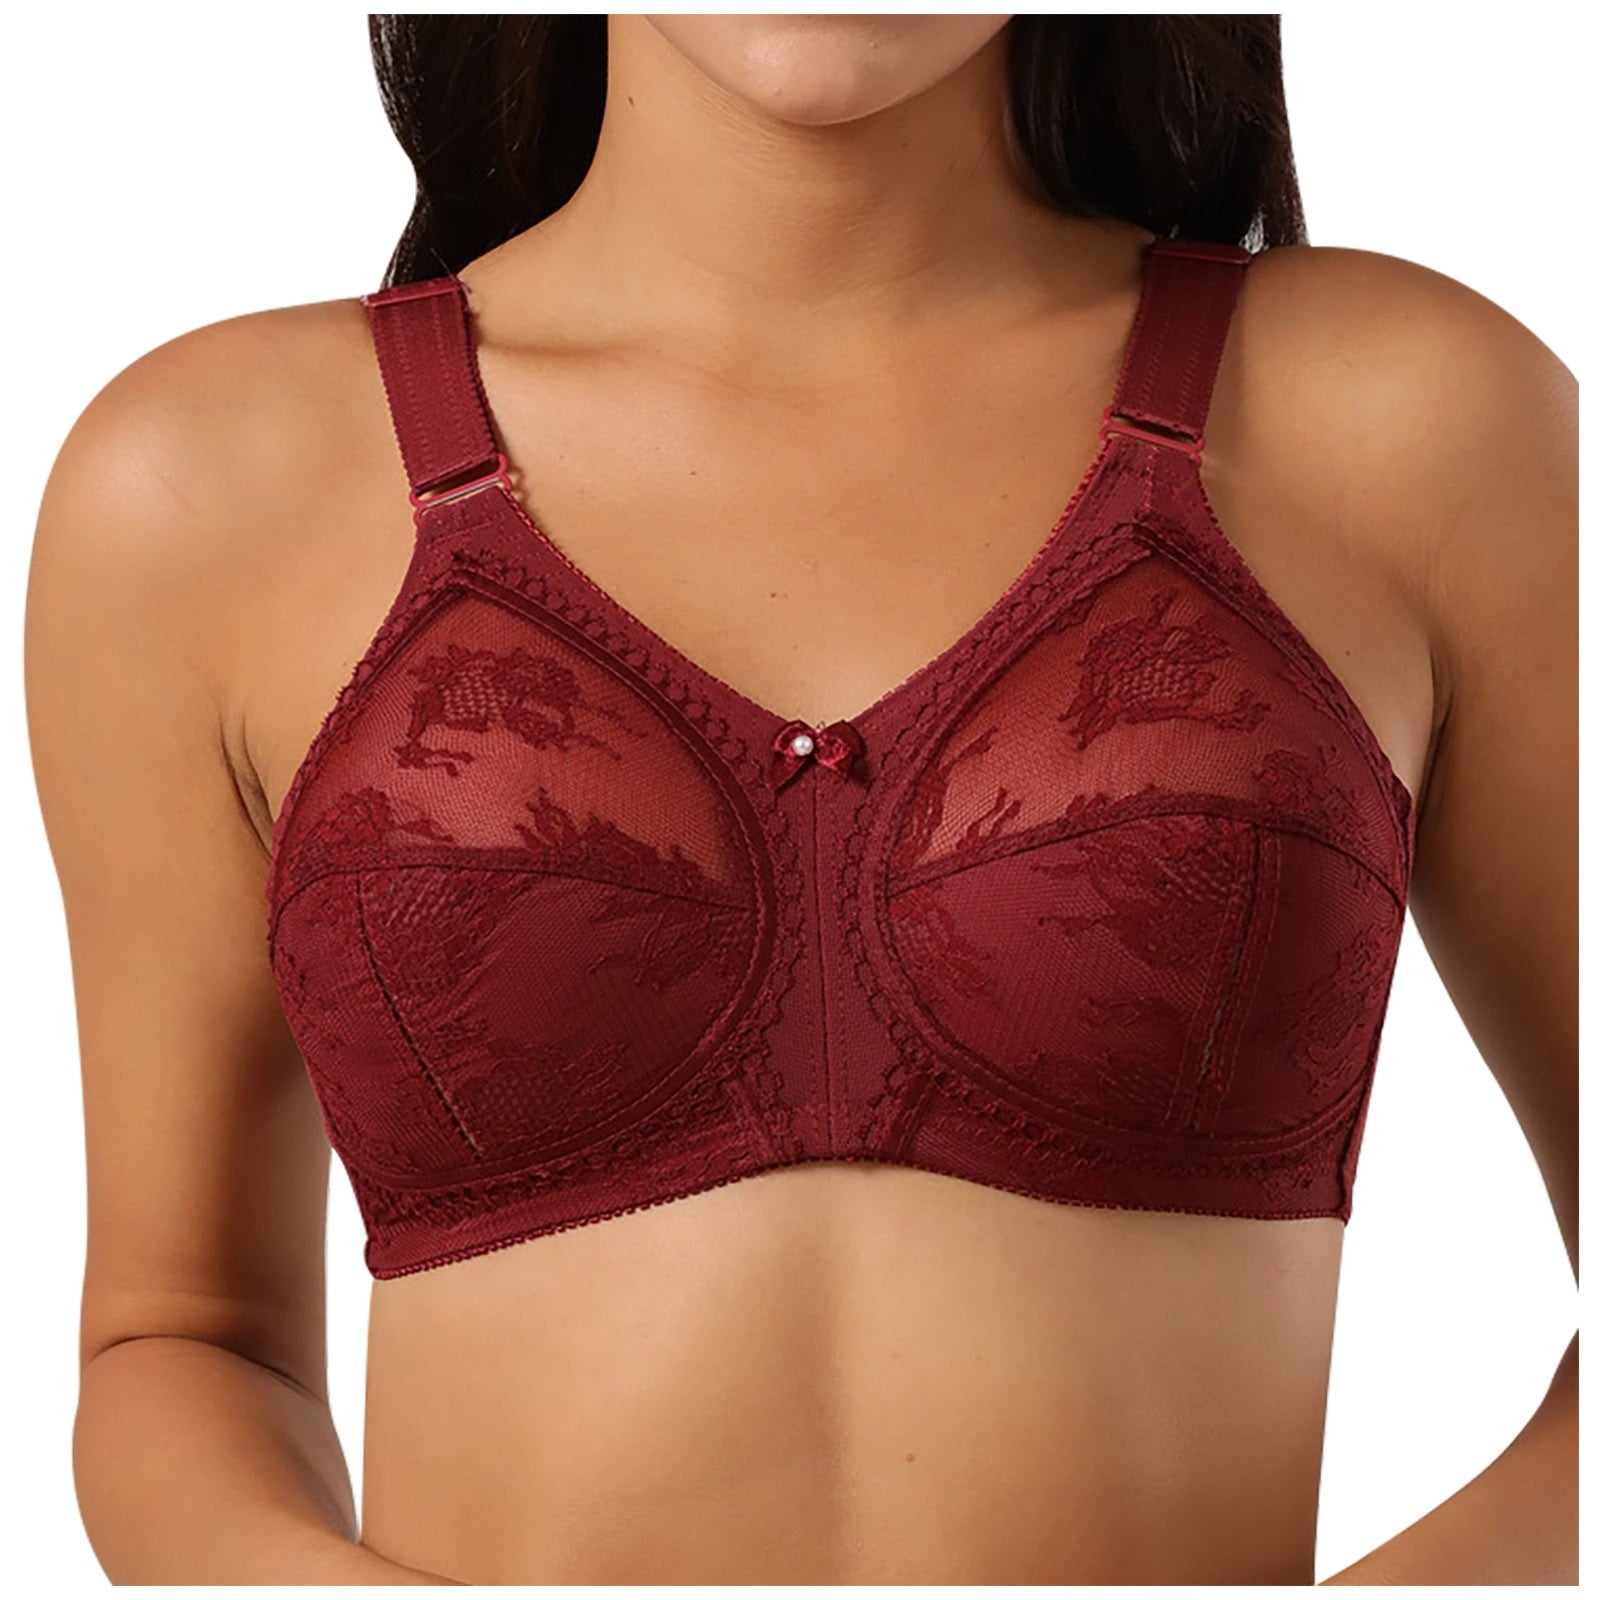 uublik Underoutfit Bras for Women Wirefree Sexy Comfortable Lace